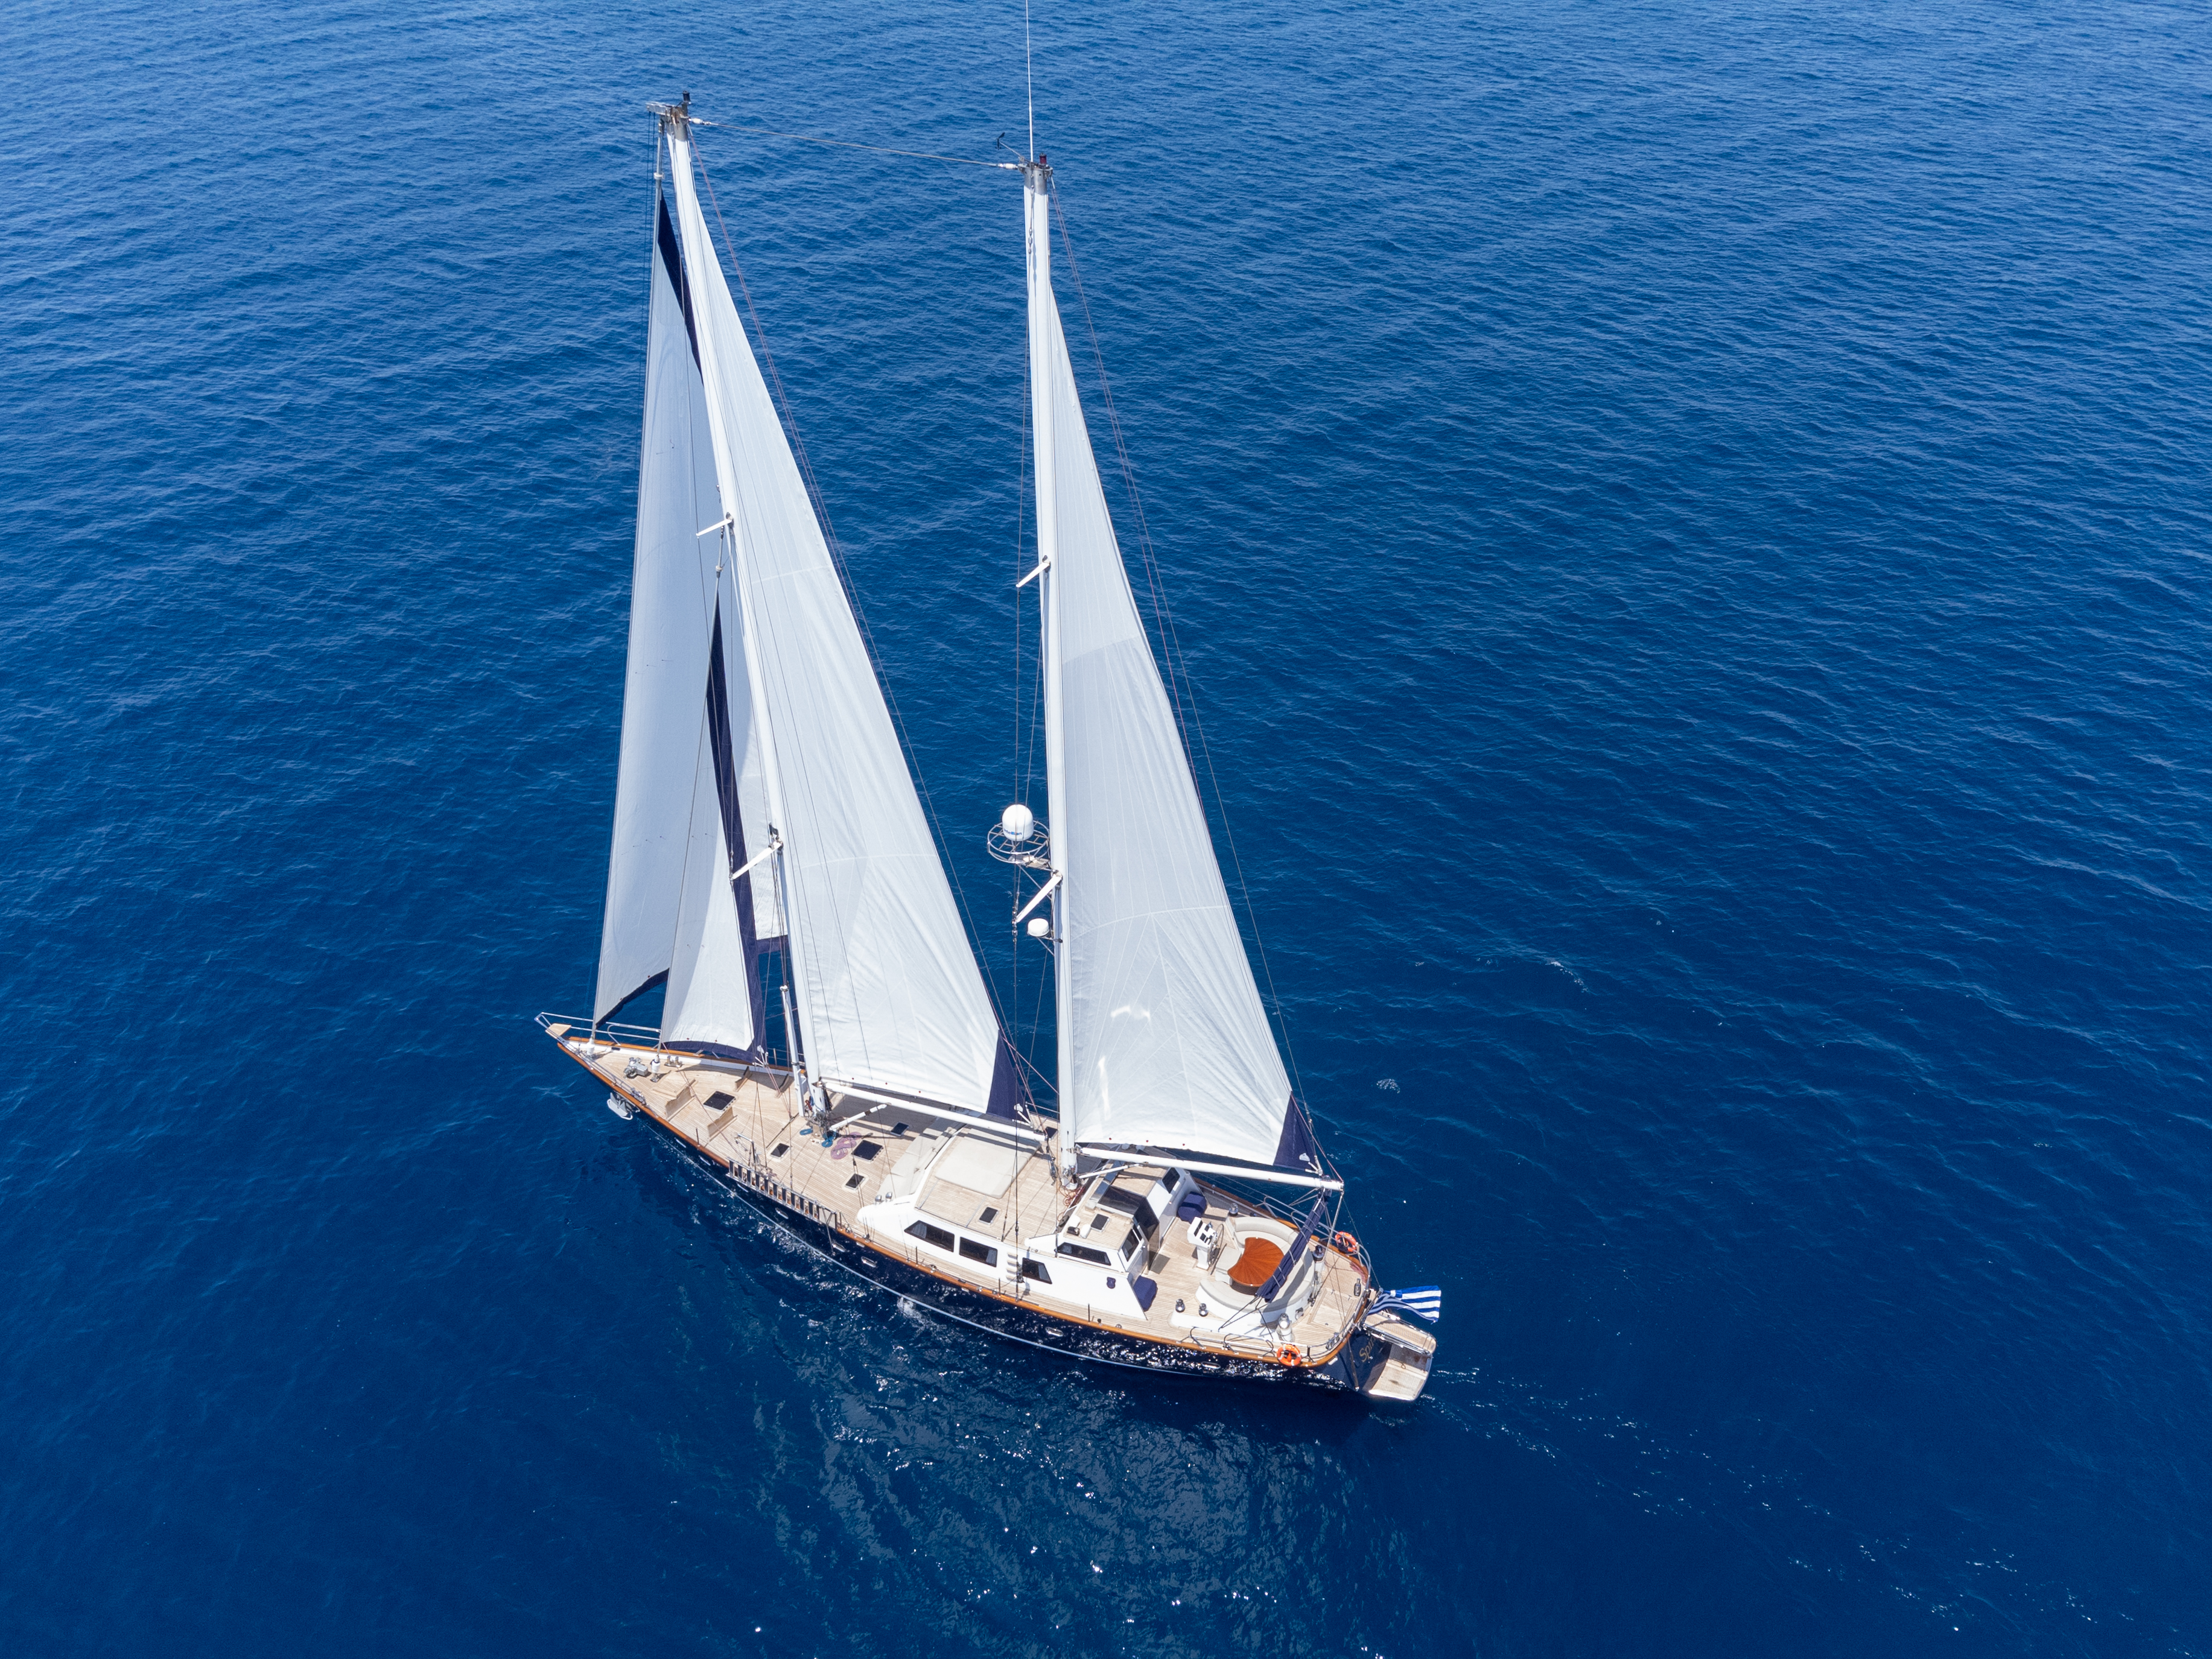 CCYD 85 - Superyacht charter Saint Lucia & Boat hire in Greece Athens and Saronic Gulf Athens Piraeus Marina Zea 3